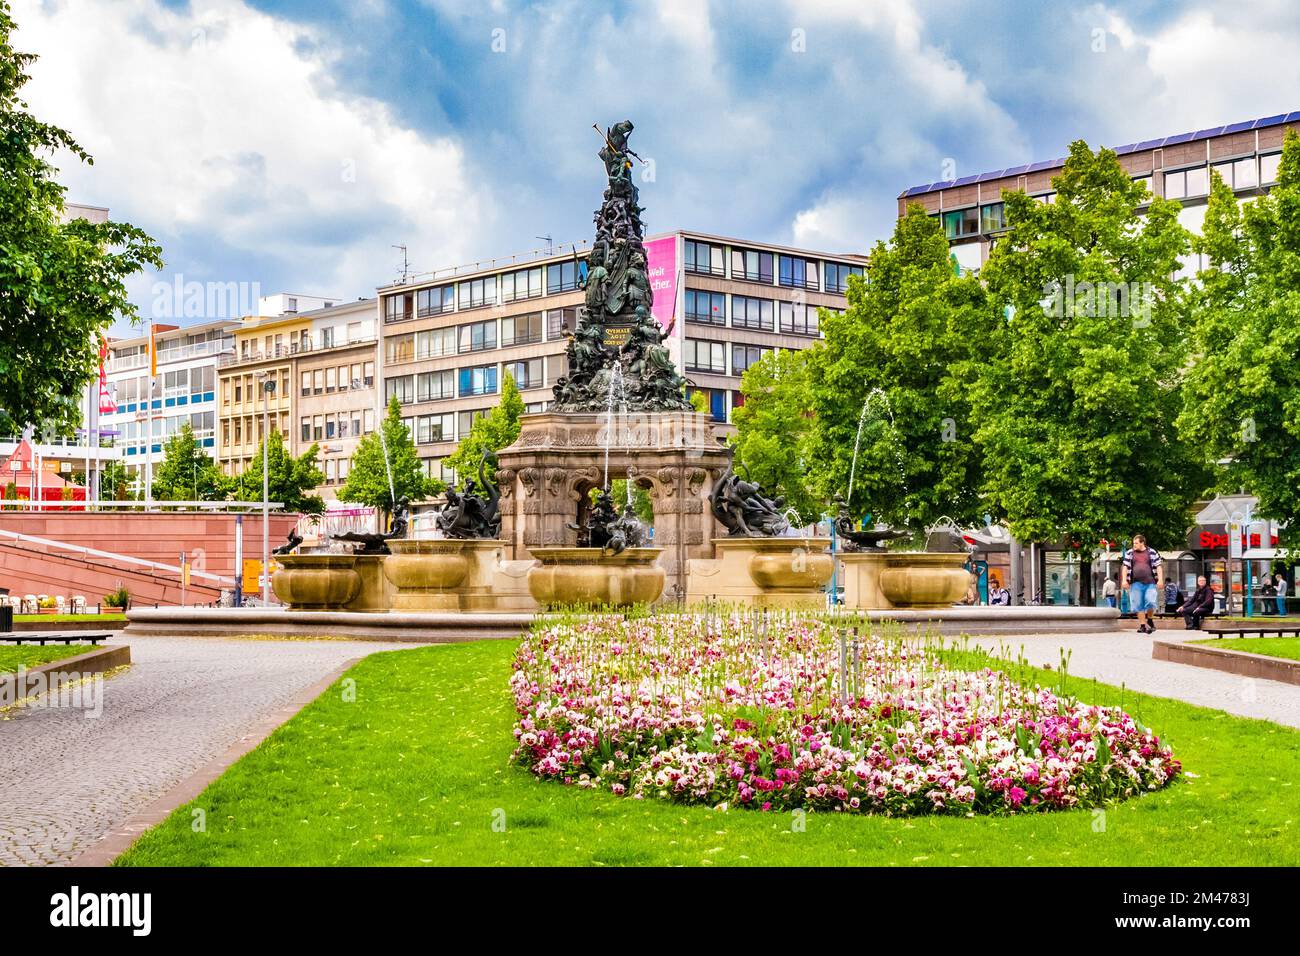 Picturesque view of a flowerbed full of white and pink garden pansies on the square Paradeplatz with the famous sculpture Grupello Pyramid in the back Stock Photo